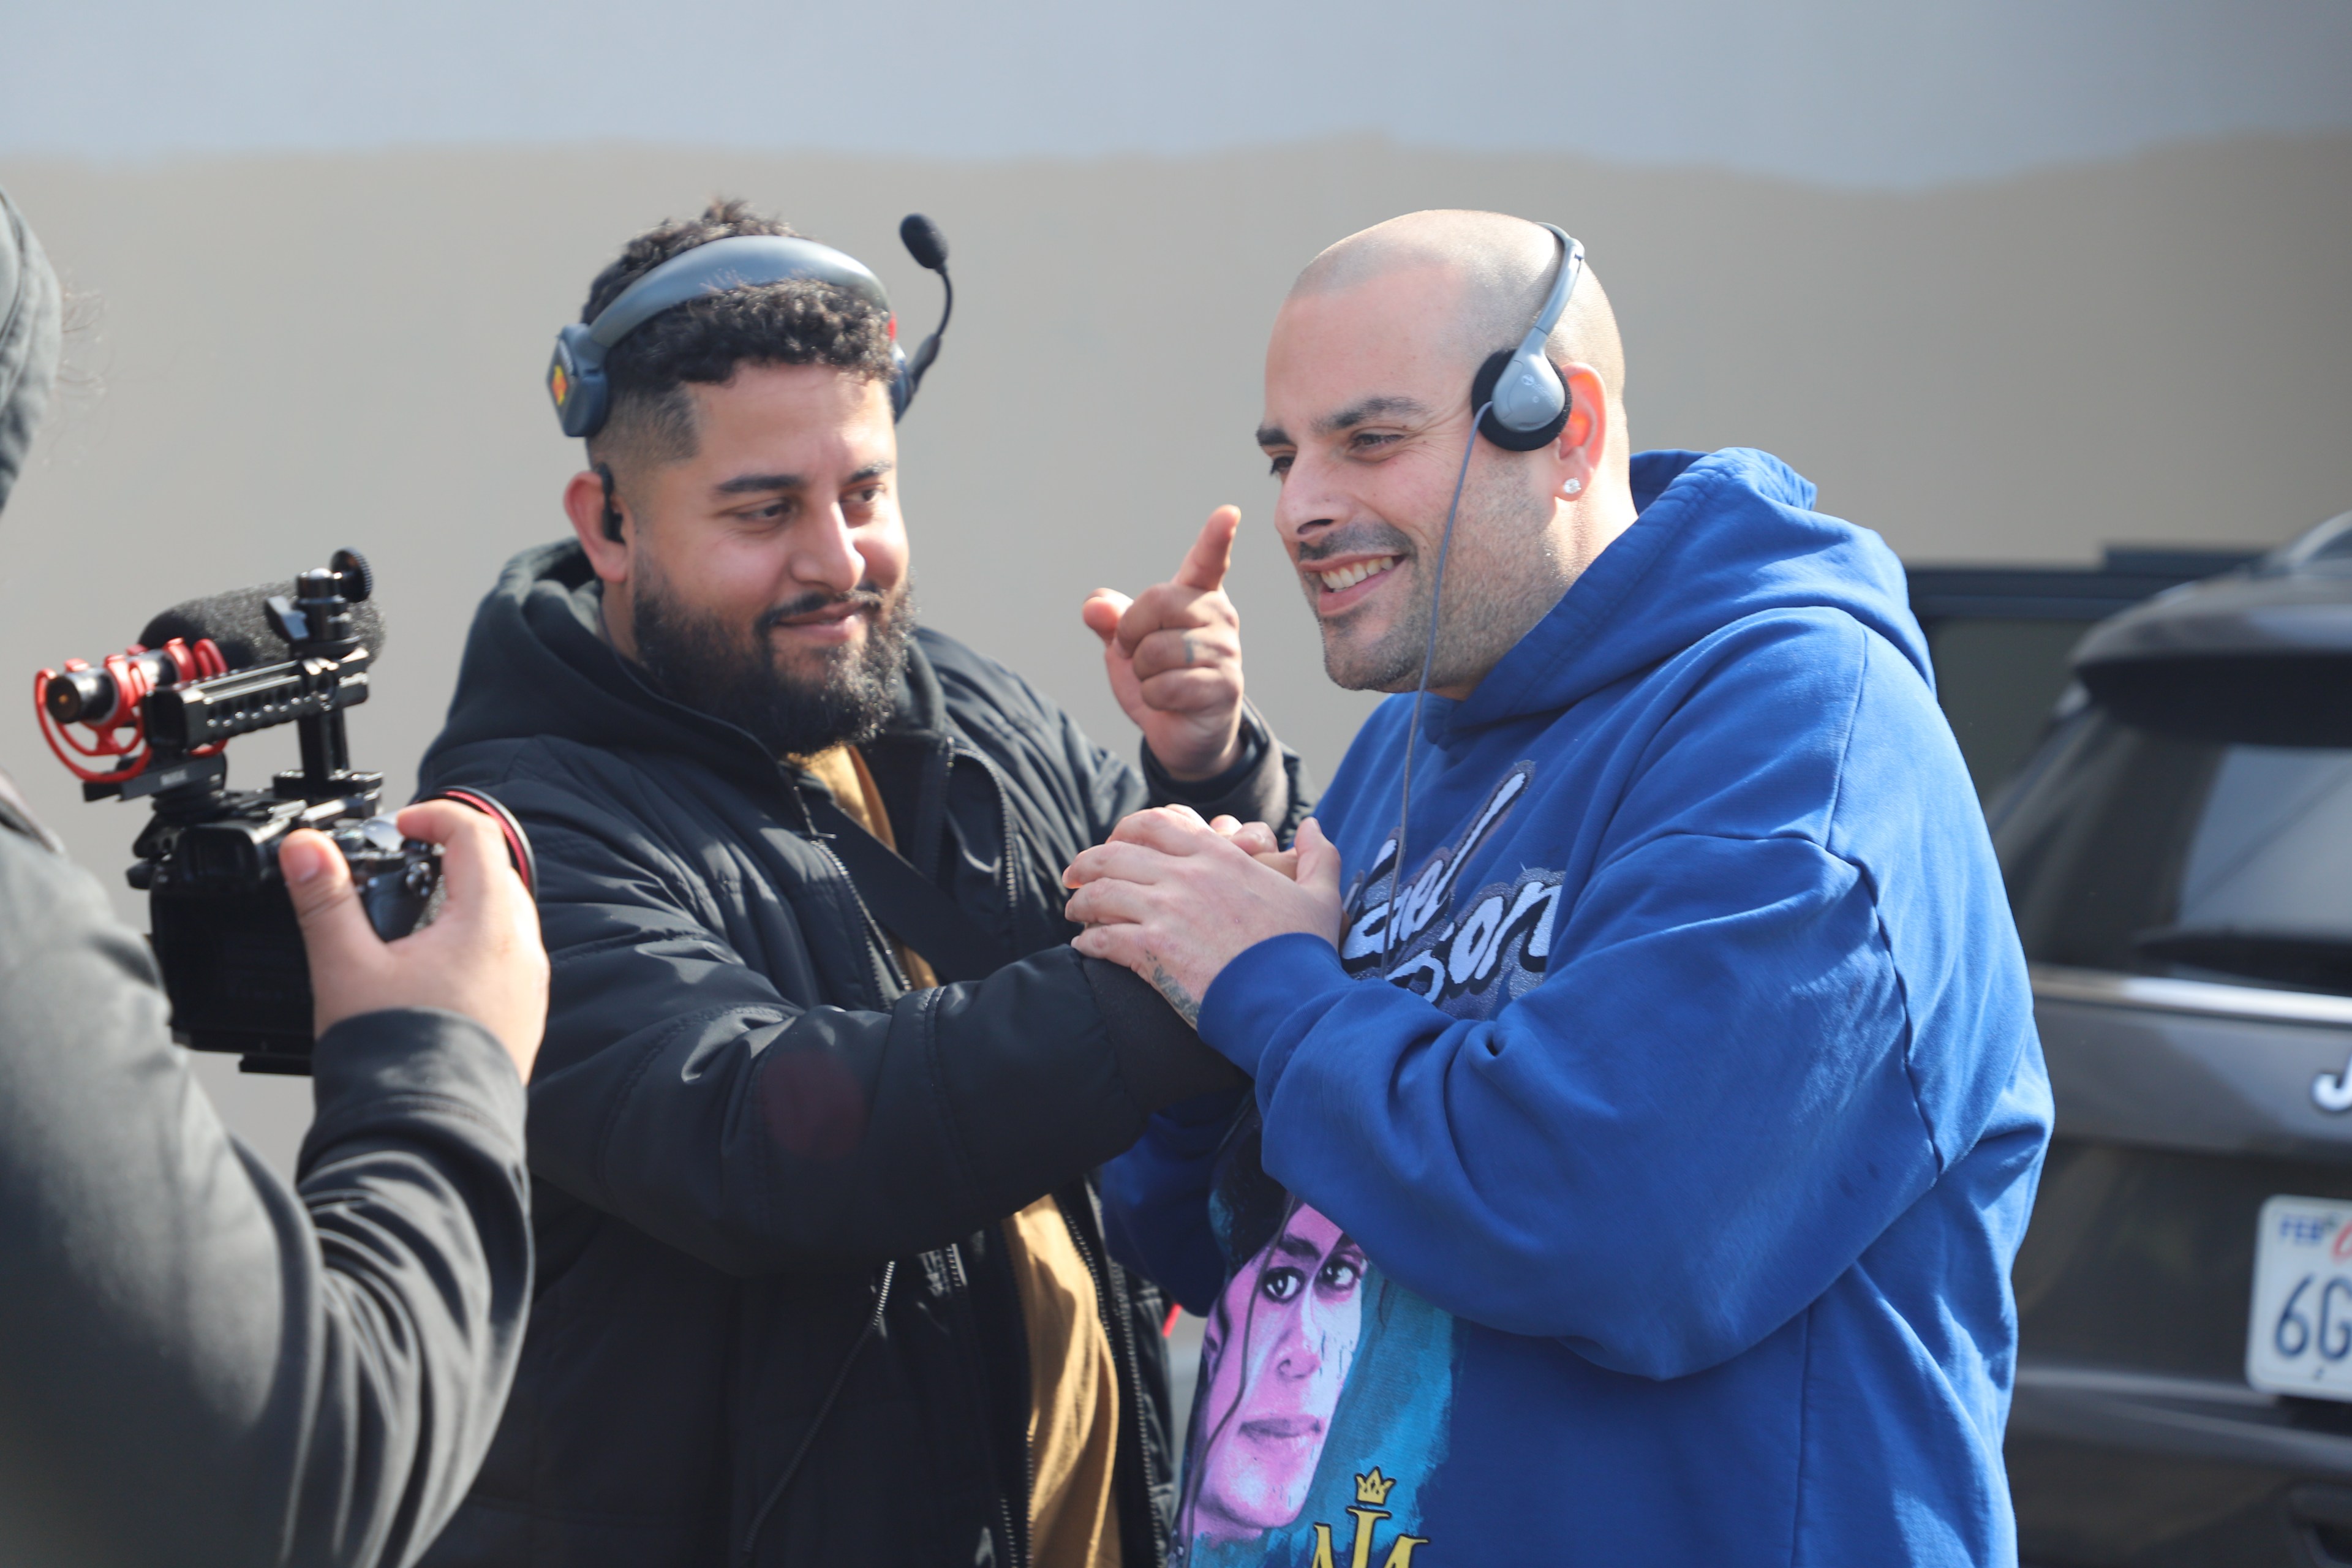 Two men are interacting joyfully outdoors; one points a camera at the other, who gestures and smiles, wearing headphones and a blue hoodie.